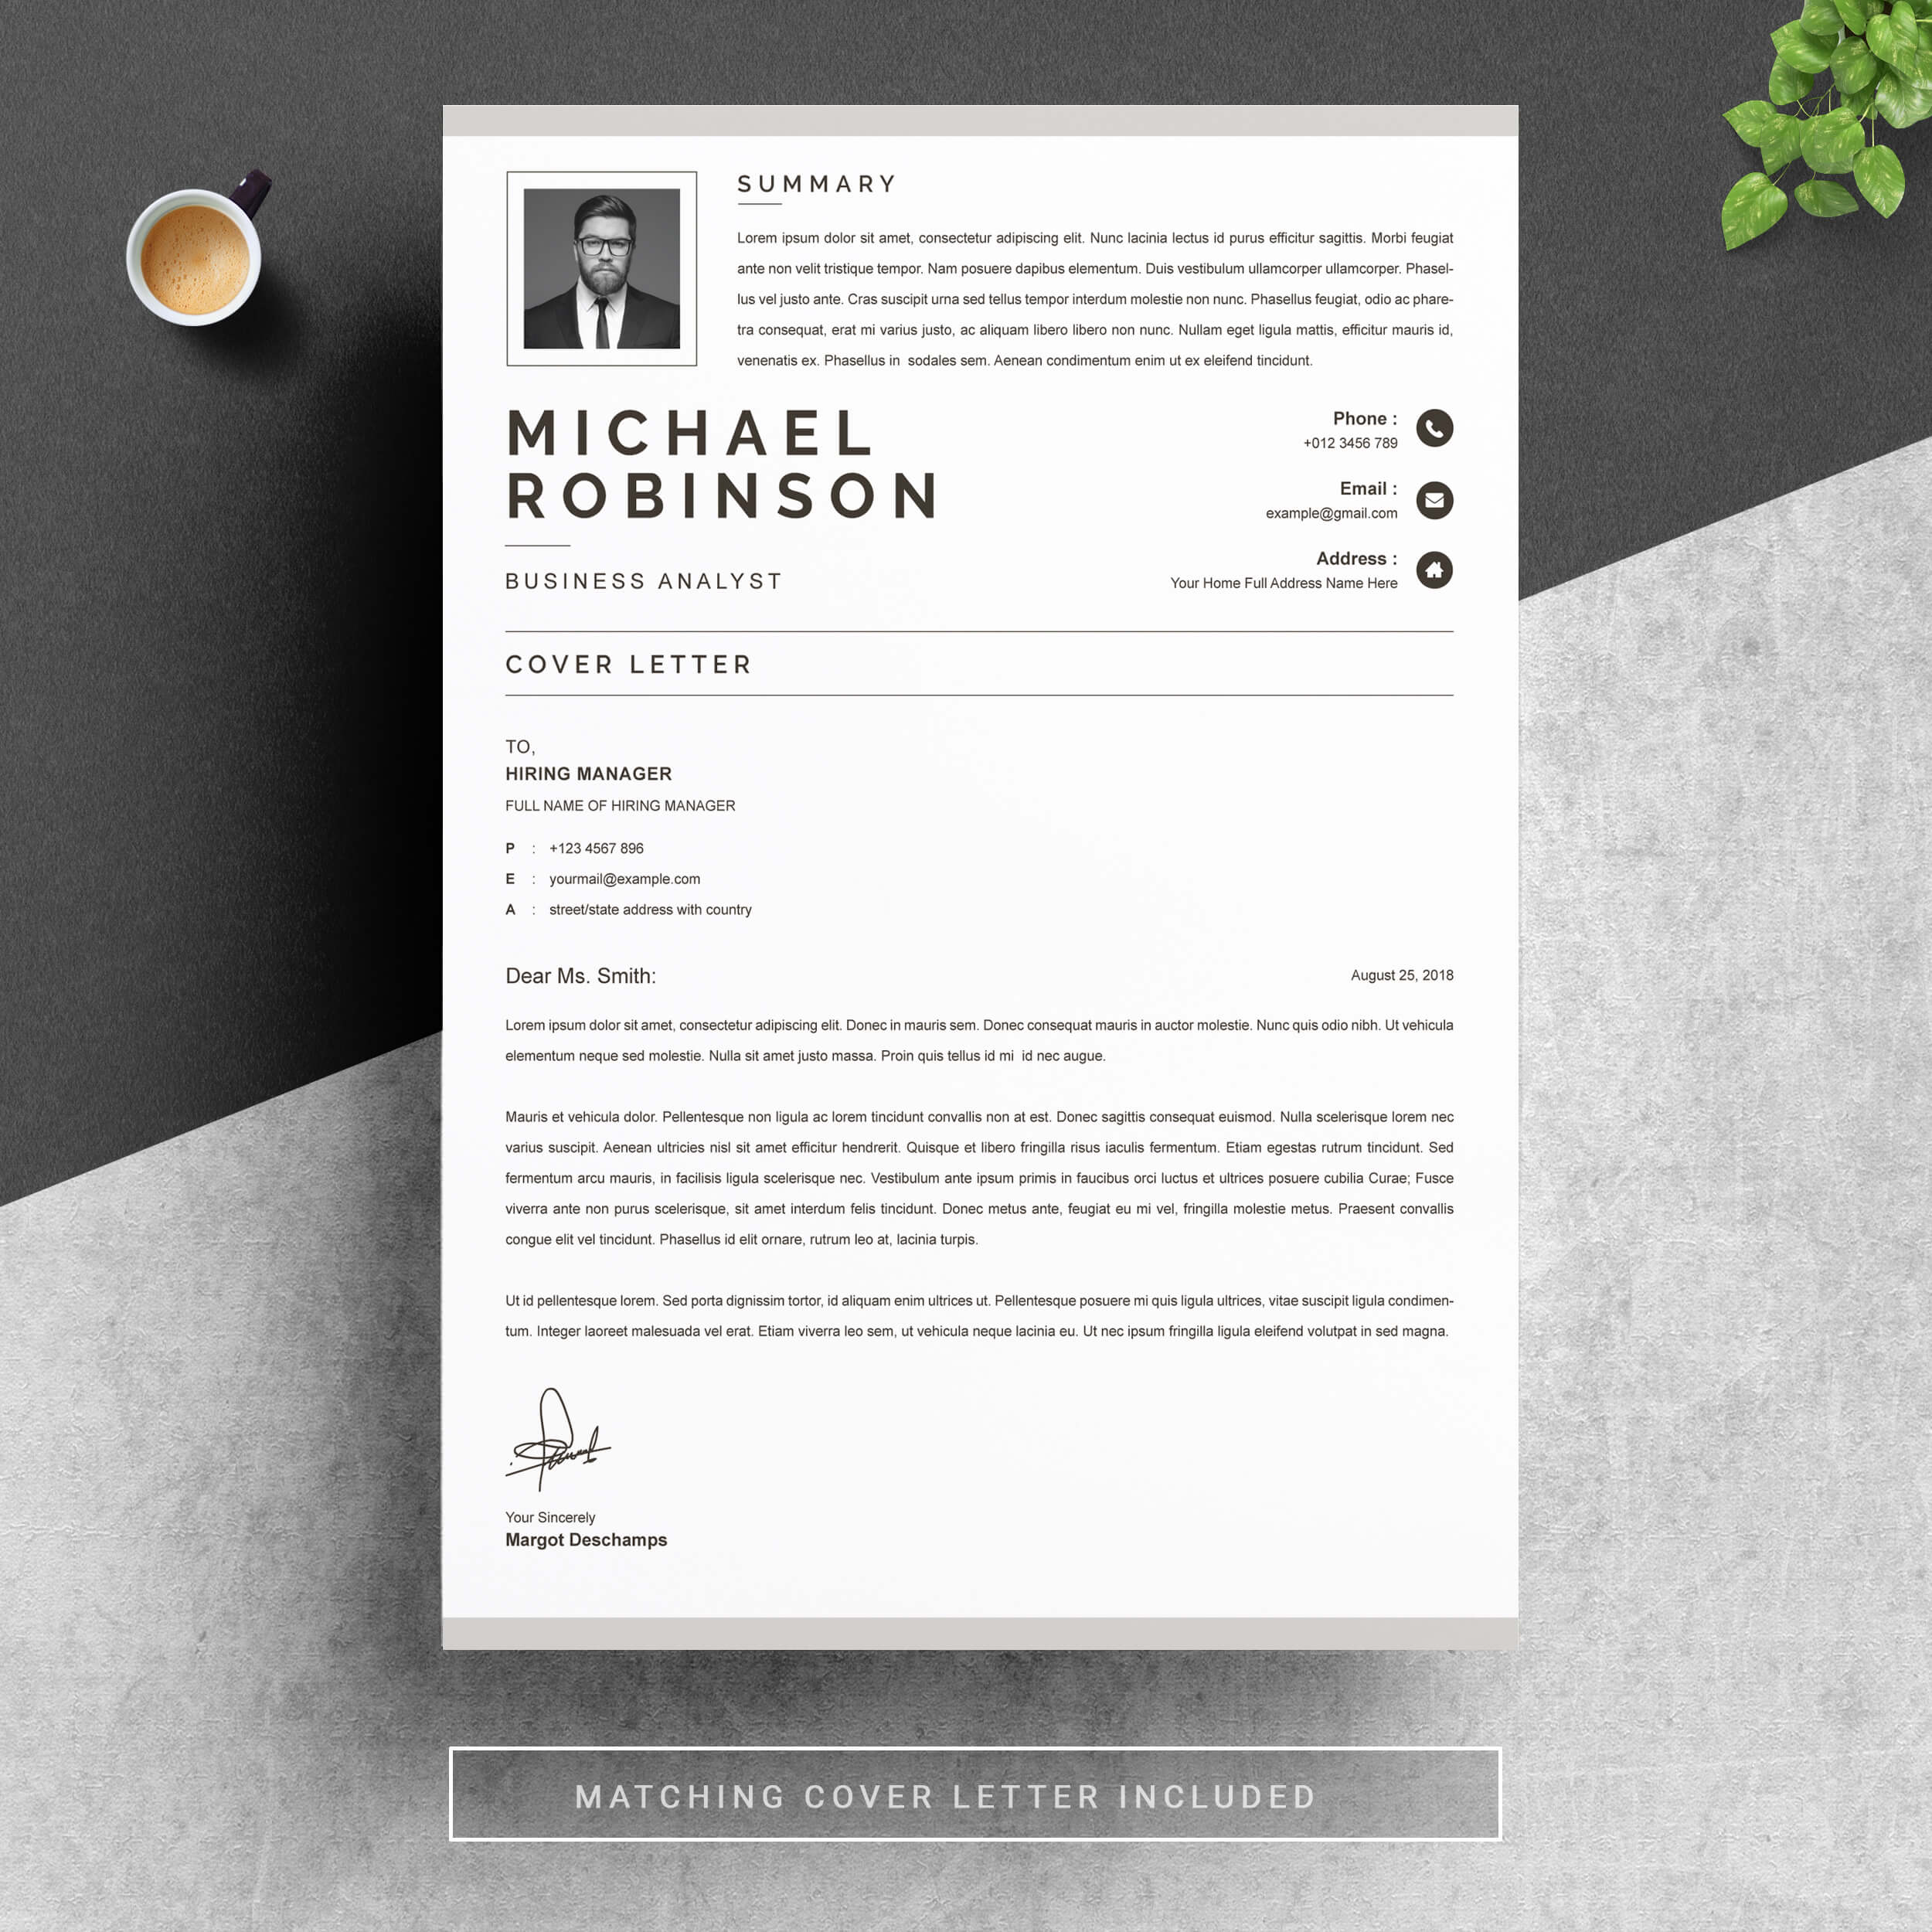 04 resume cover letter page free resume design template 1 594